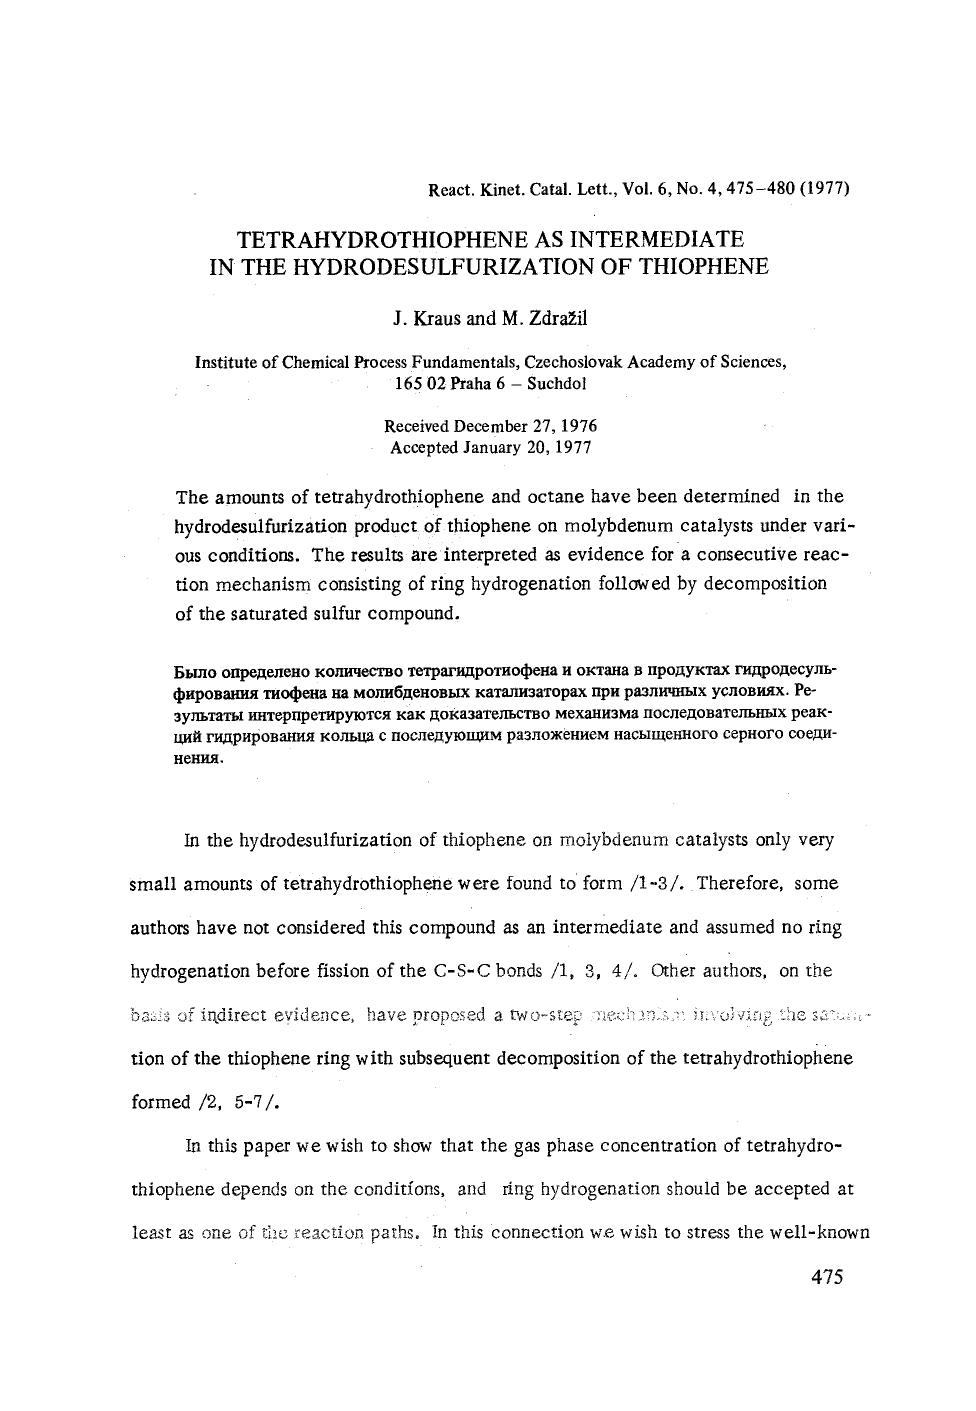 Tetrahydrothiophene as intermediate in the hydrodesulfurization of thiophene by Unknown